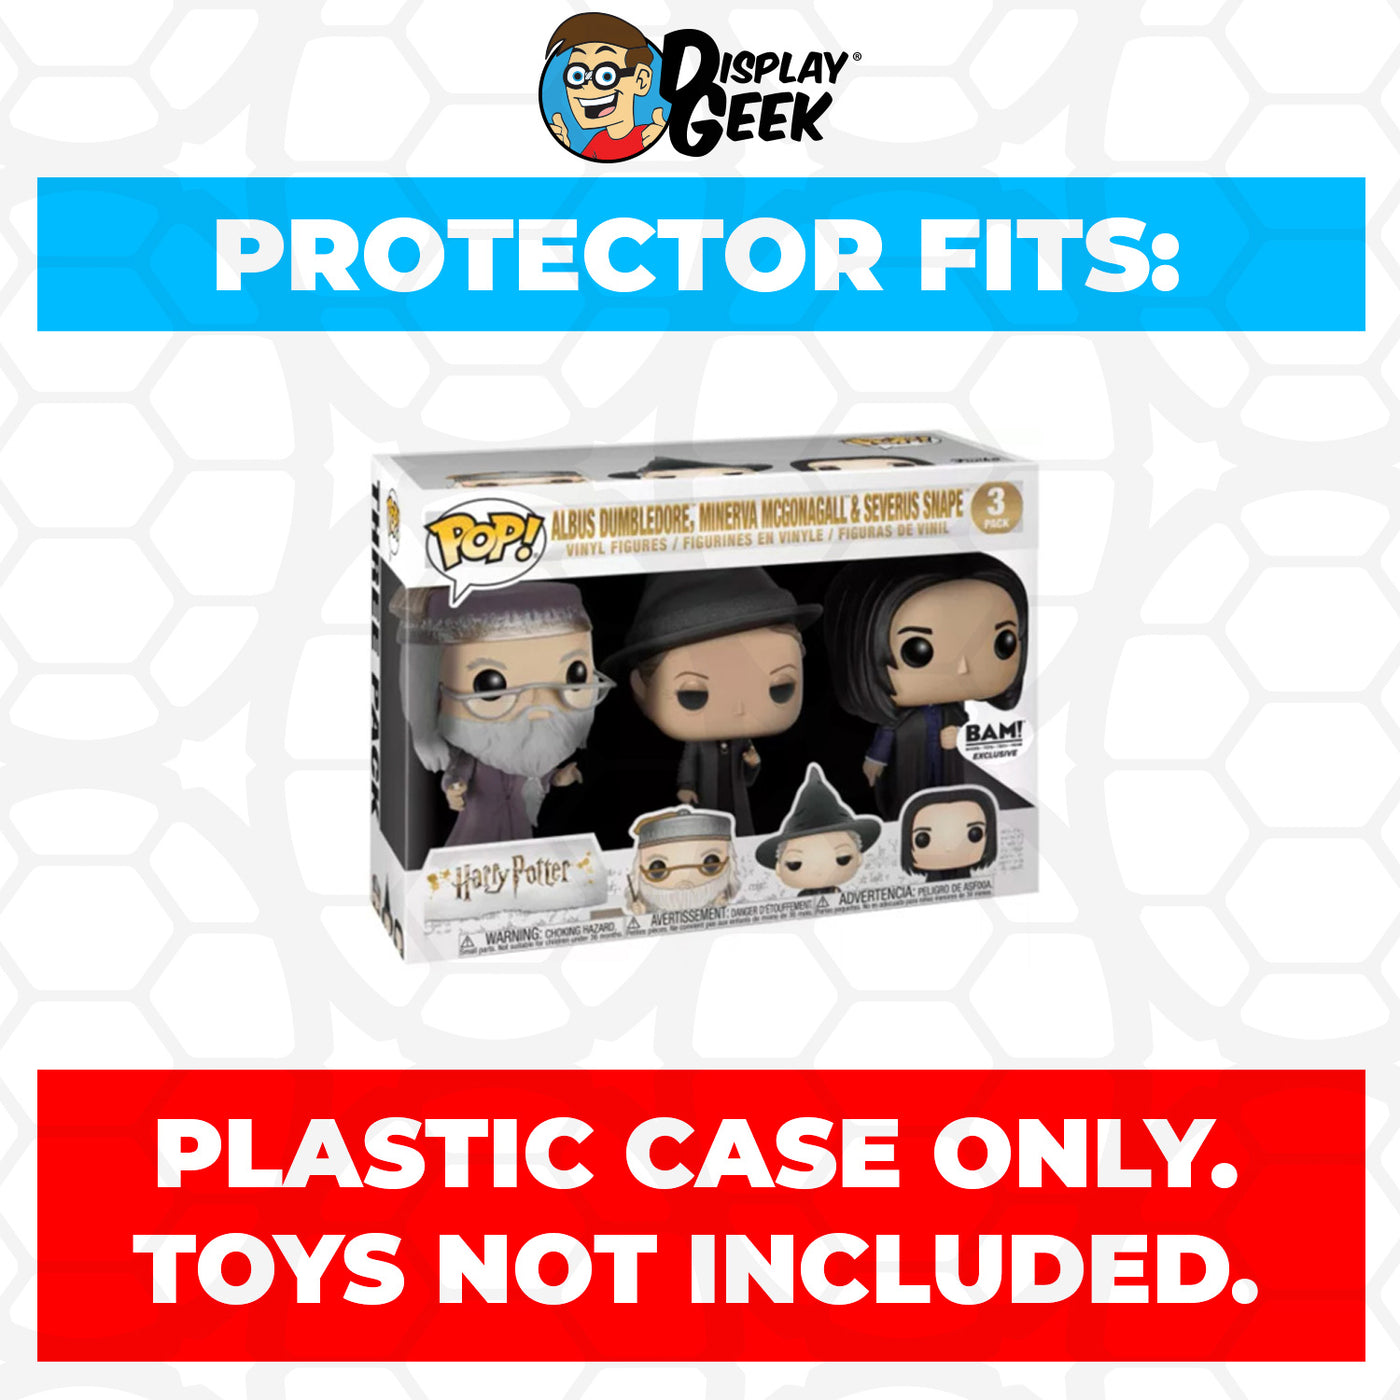 Pop Protector for 3 Pack Albus Dumbledore, Minerva McGonagall & Snape Funko Pop on The Protector Guide App by Display Geek